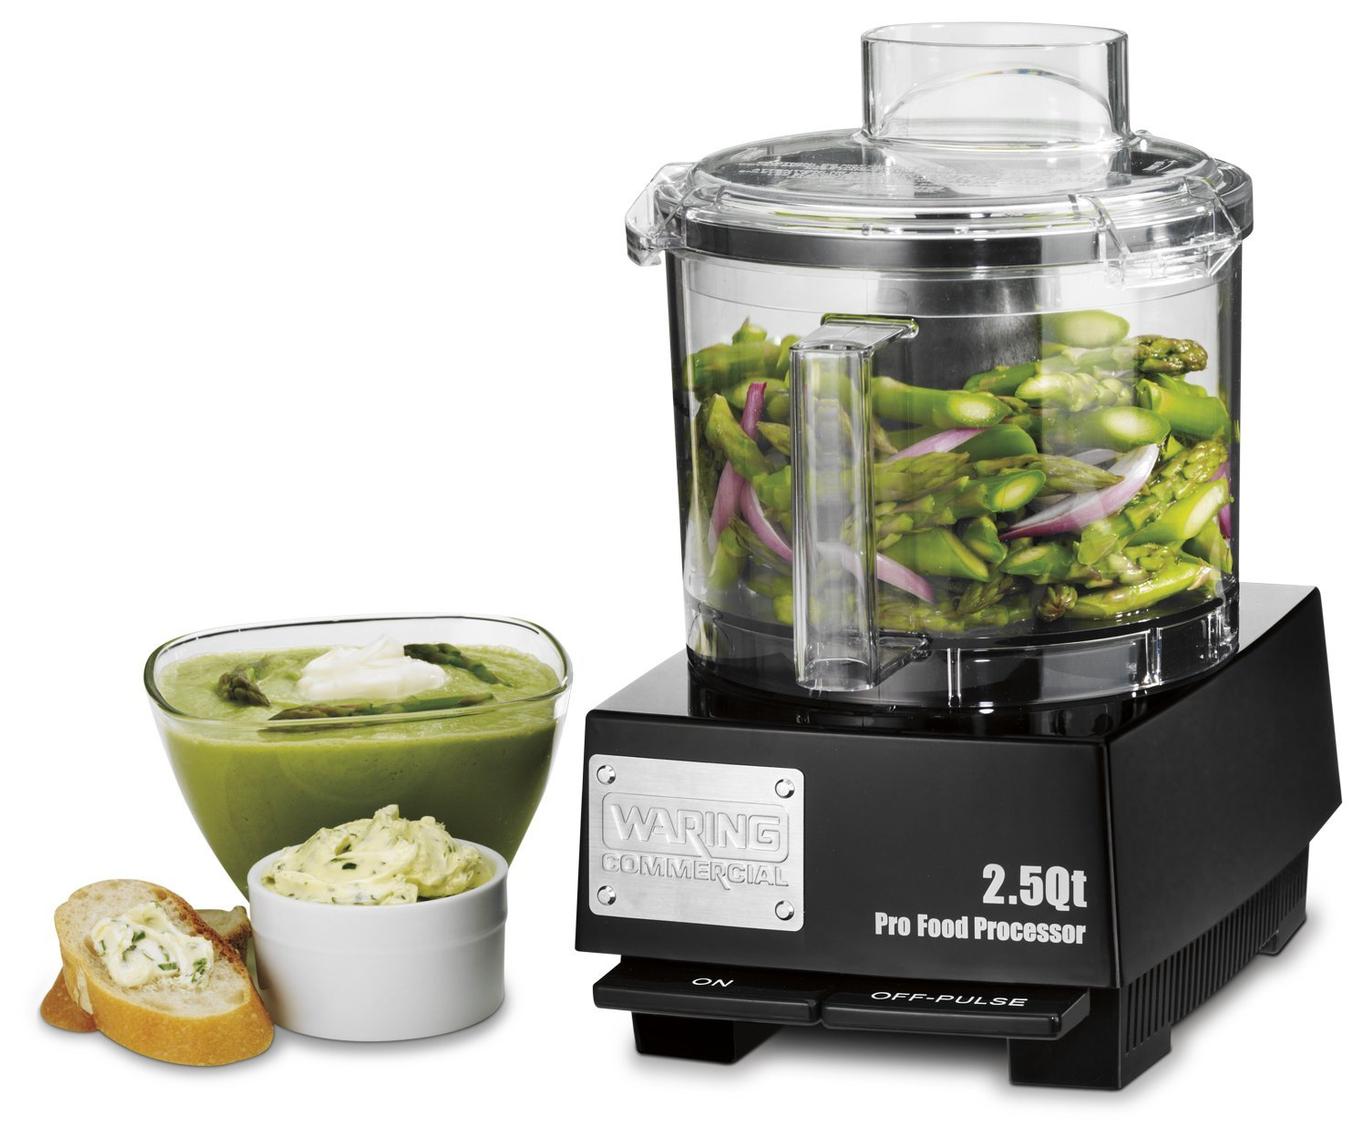 Waring WFP11SW 2.5 Quart Food Processor with S-Blade and Whipping Disc